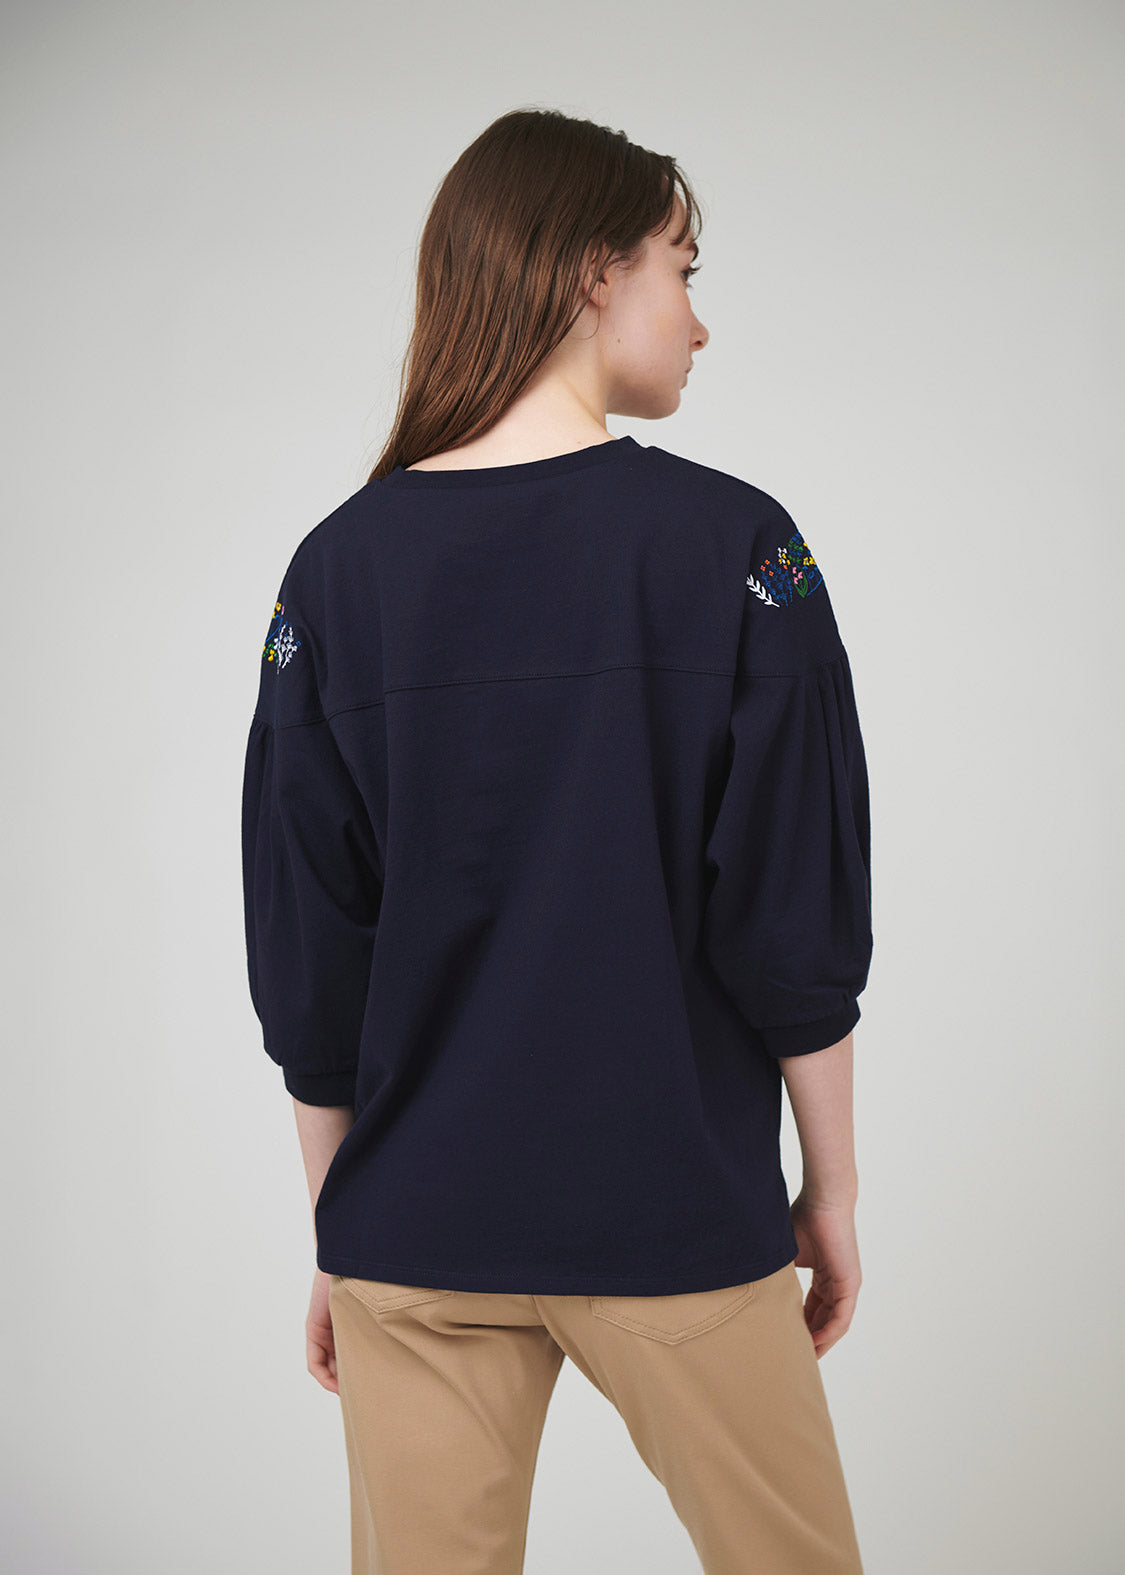 Embroidery Mid Sleeve Tee (From Silhouette of Forest)